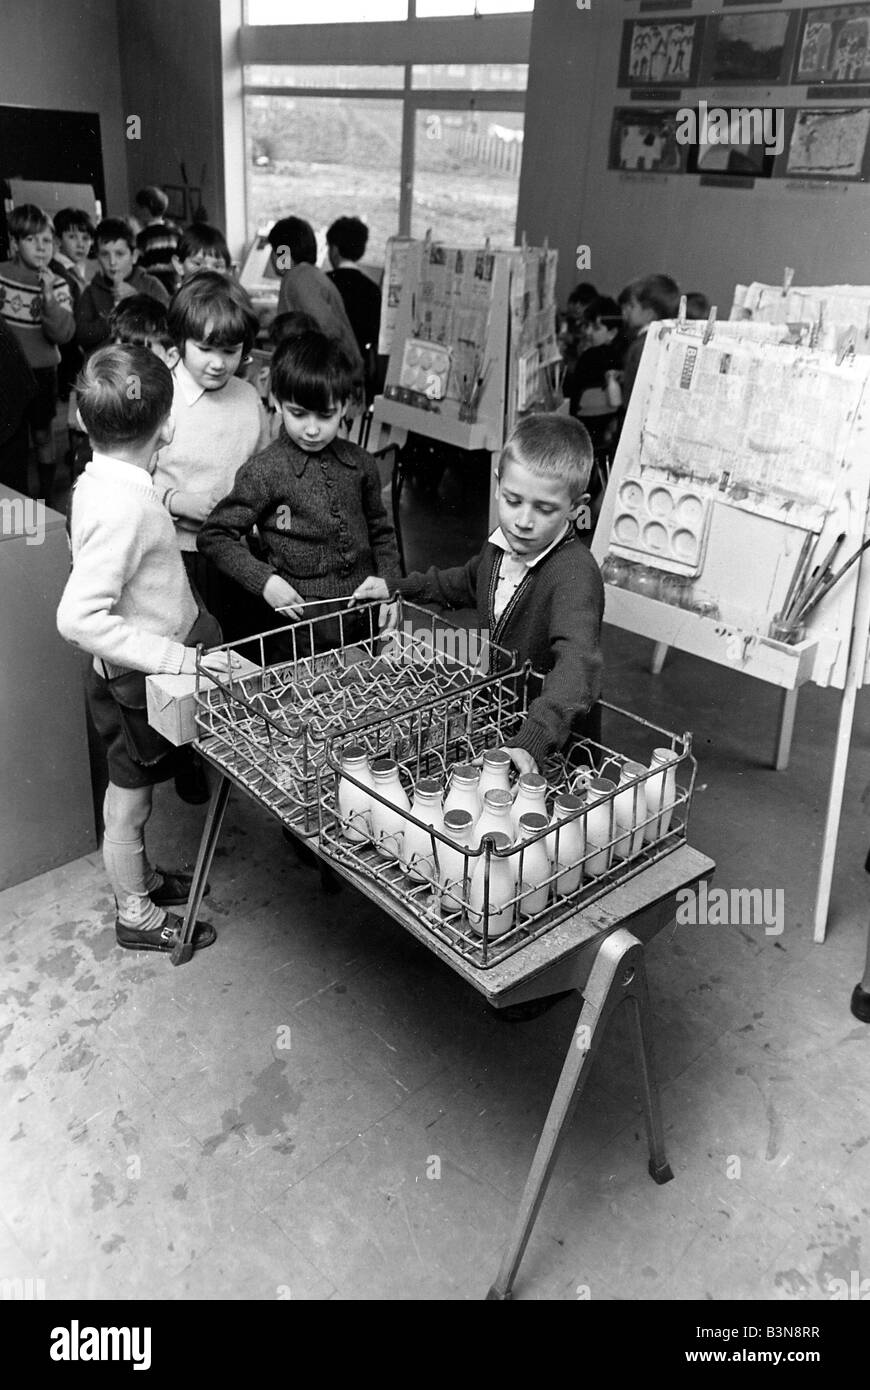 MILK TIME Milk monitor hands out the day's supplied to fellow pupils at a UK school in 1950s Stock Photo